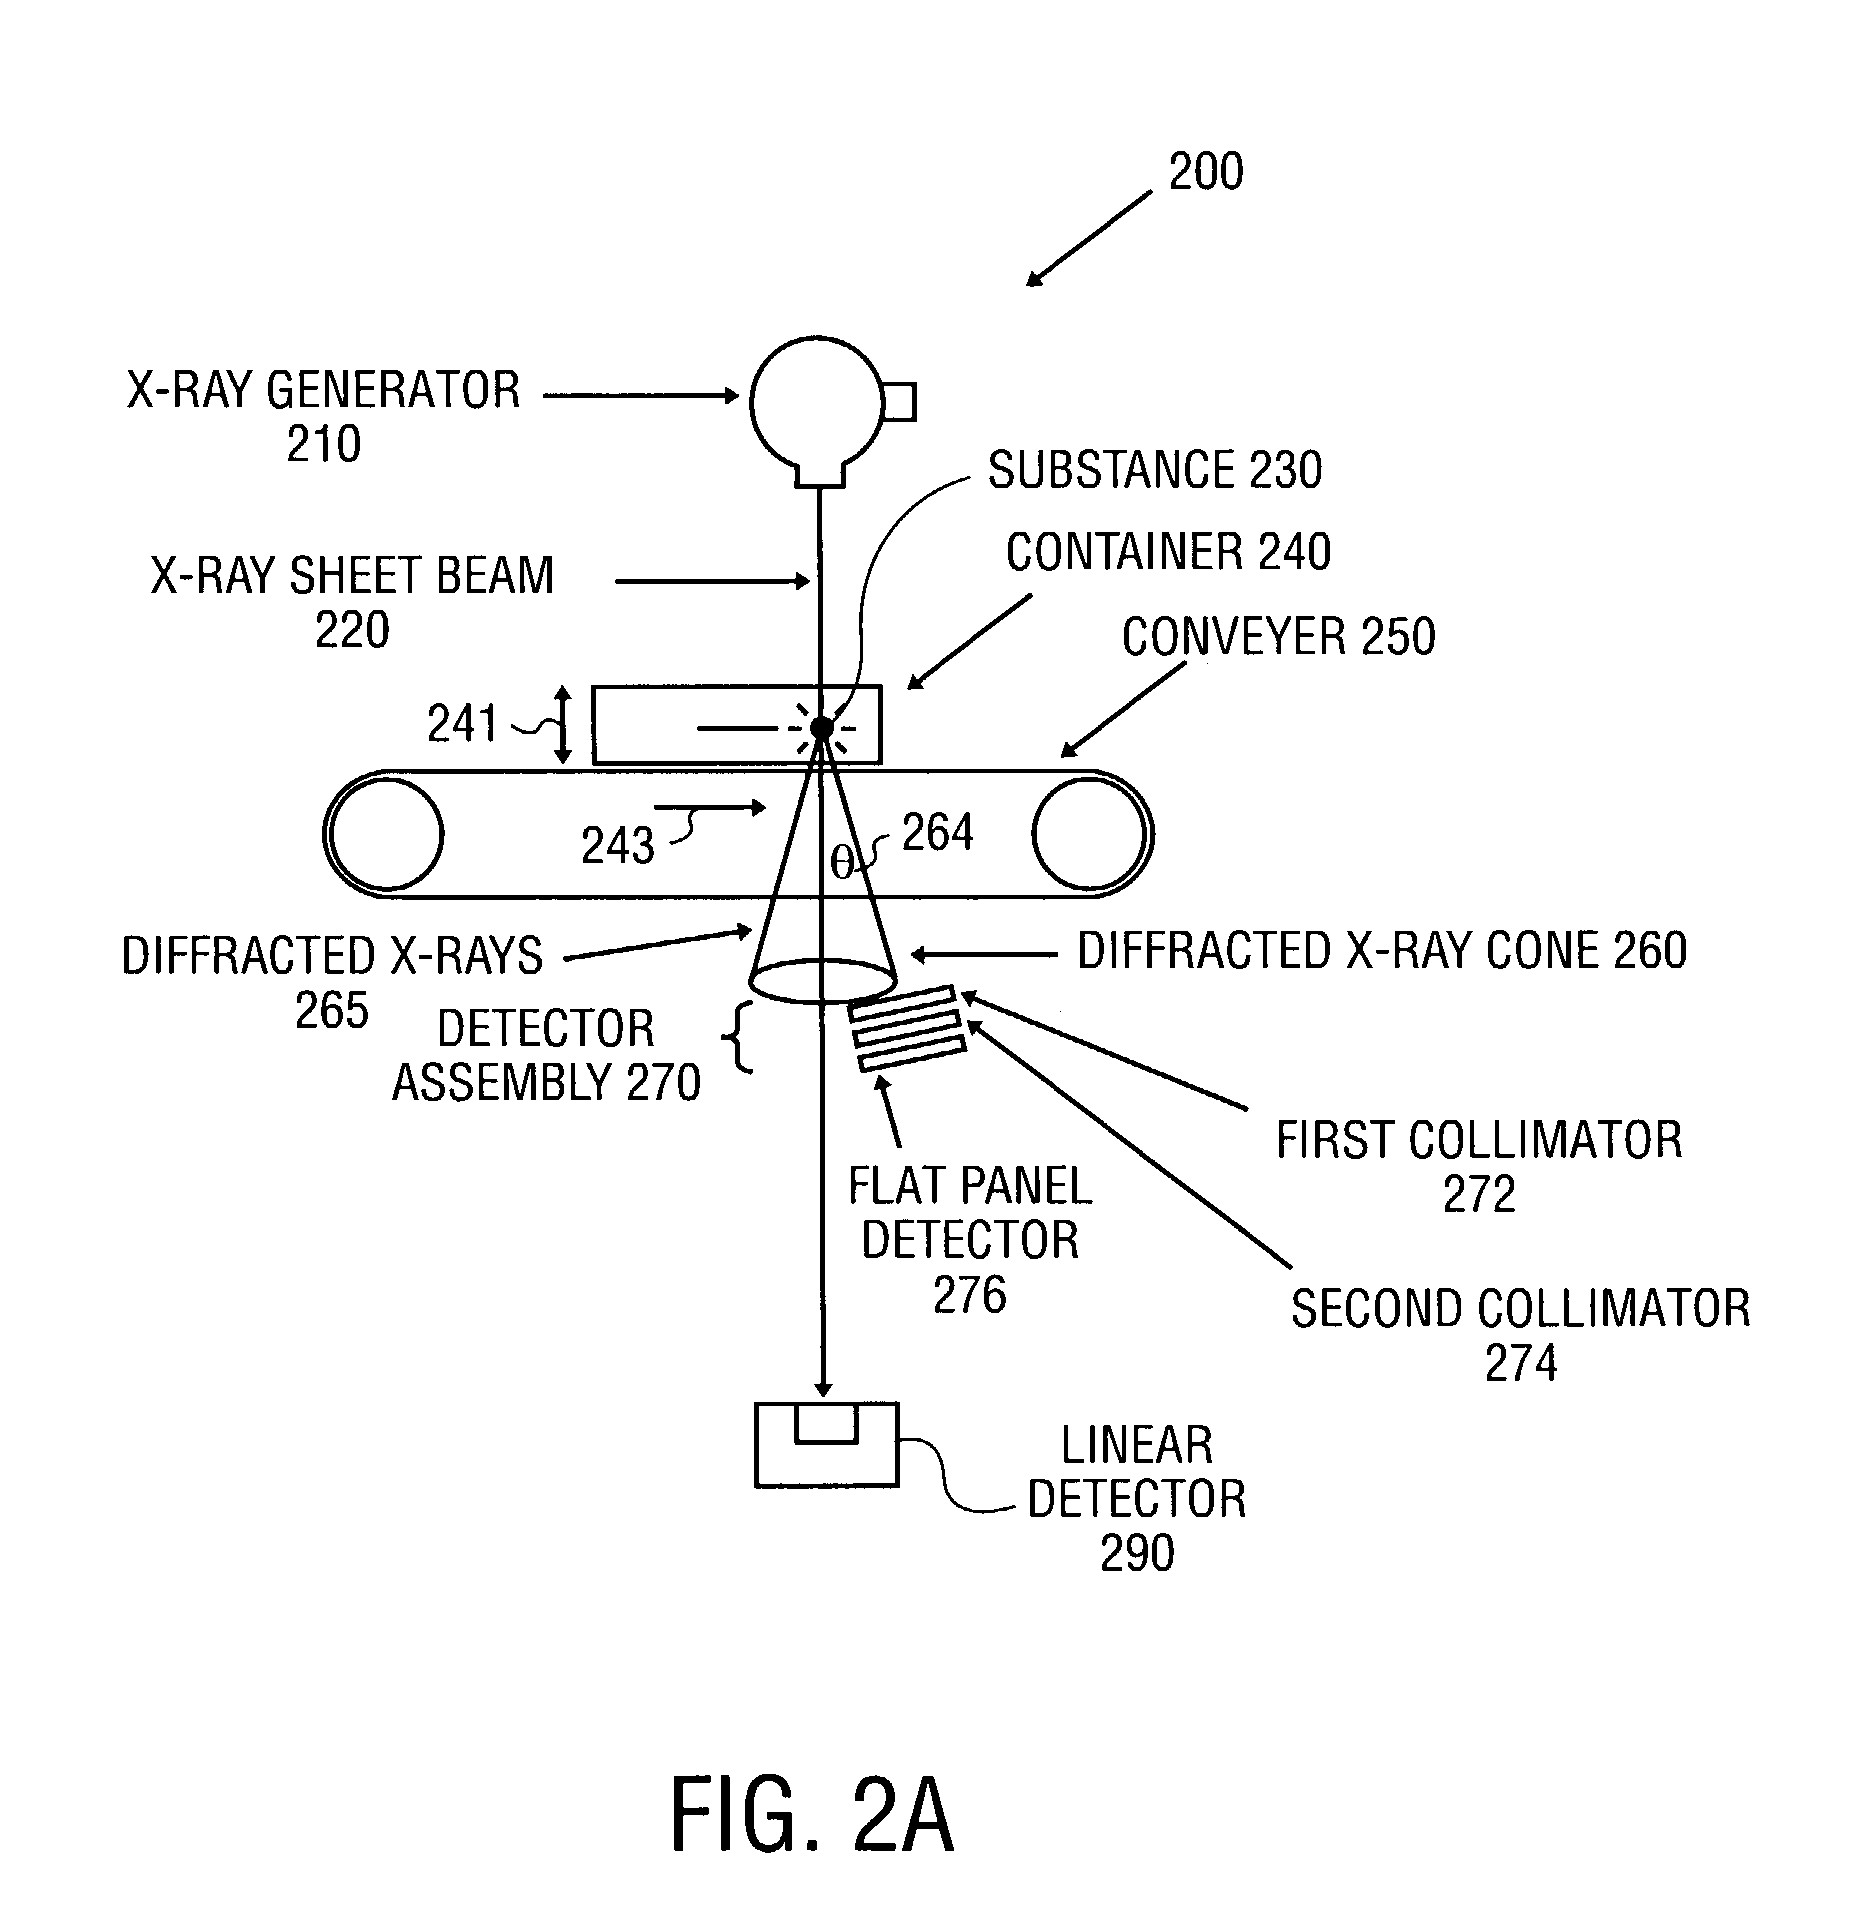 X-ray diffraction-based scanning system